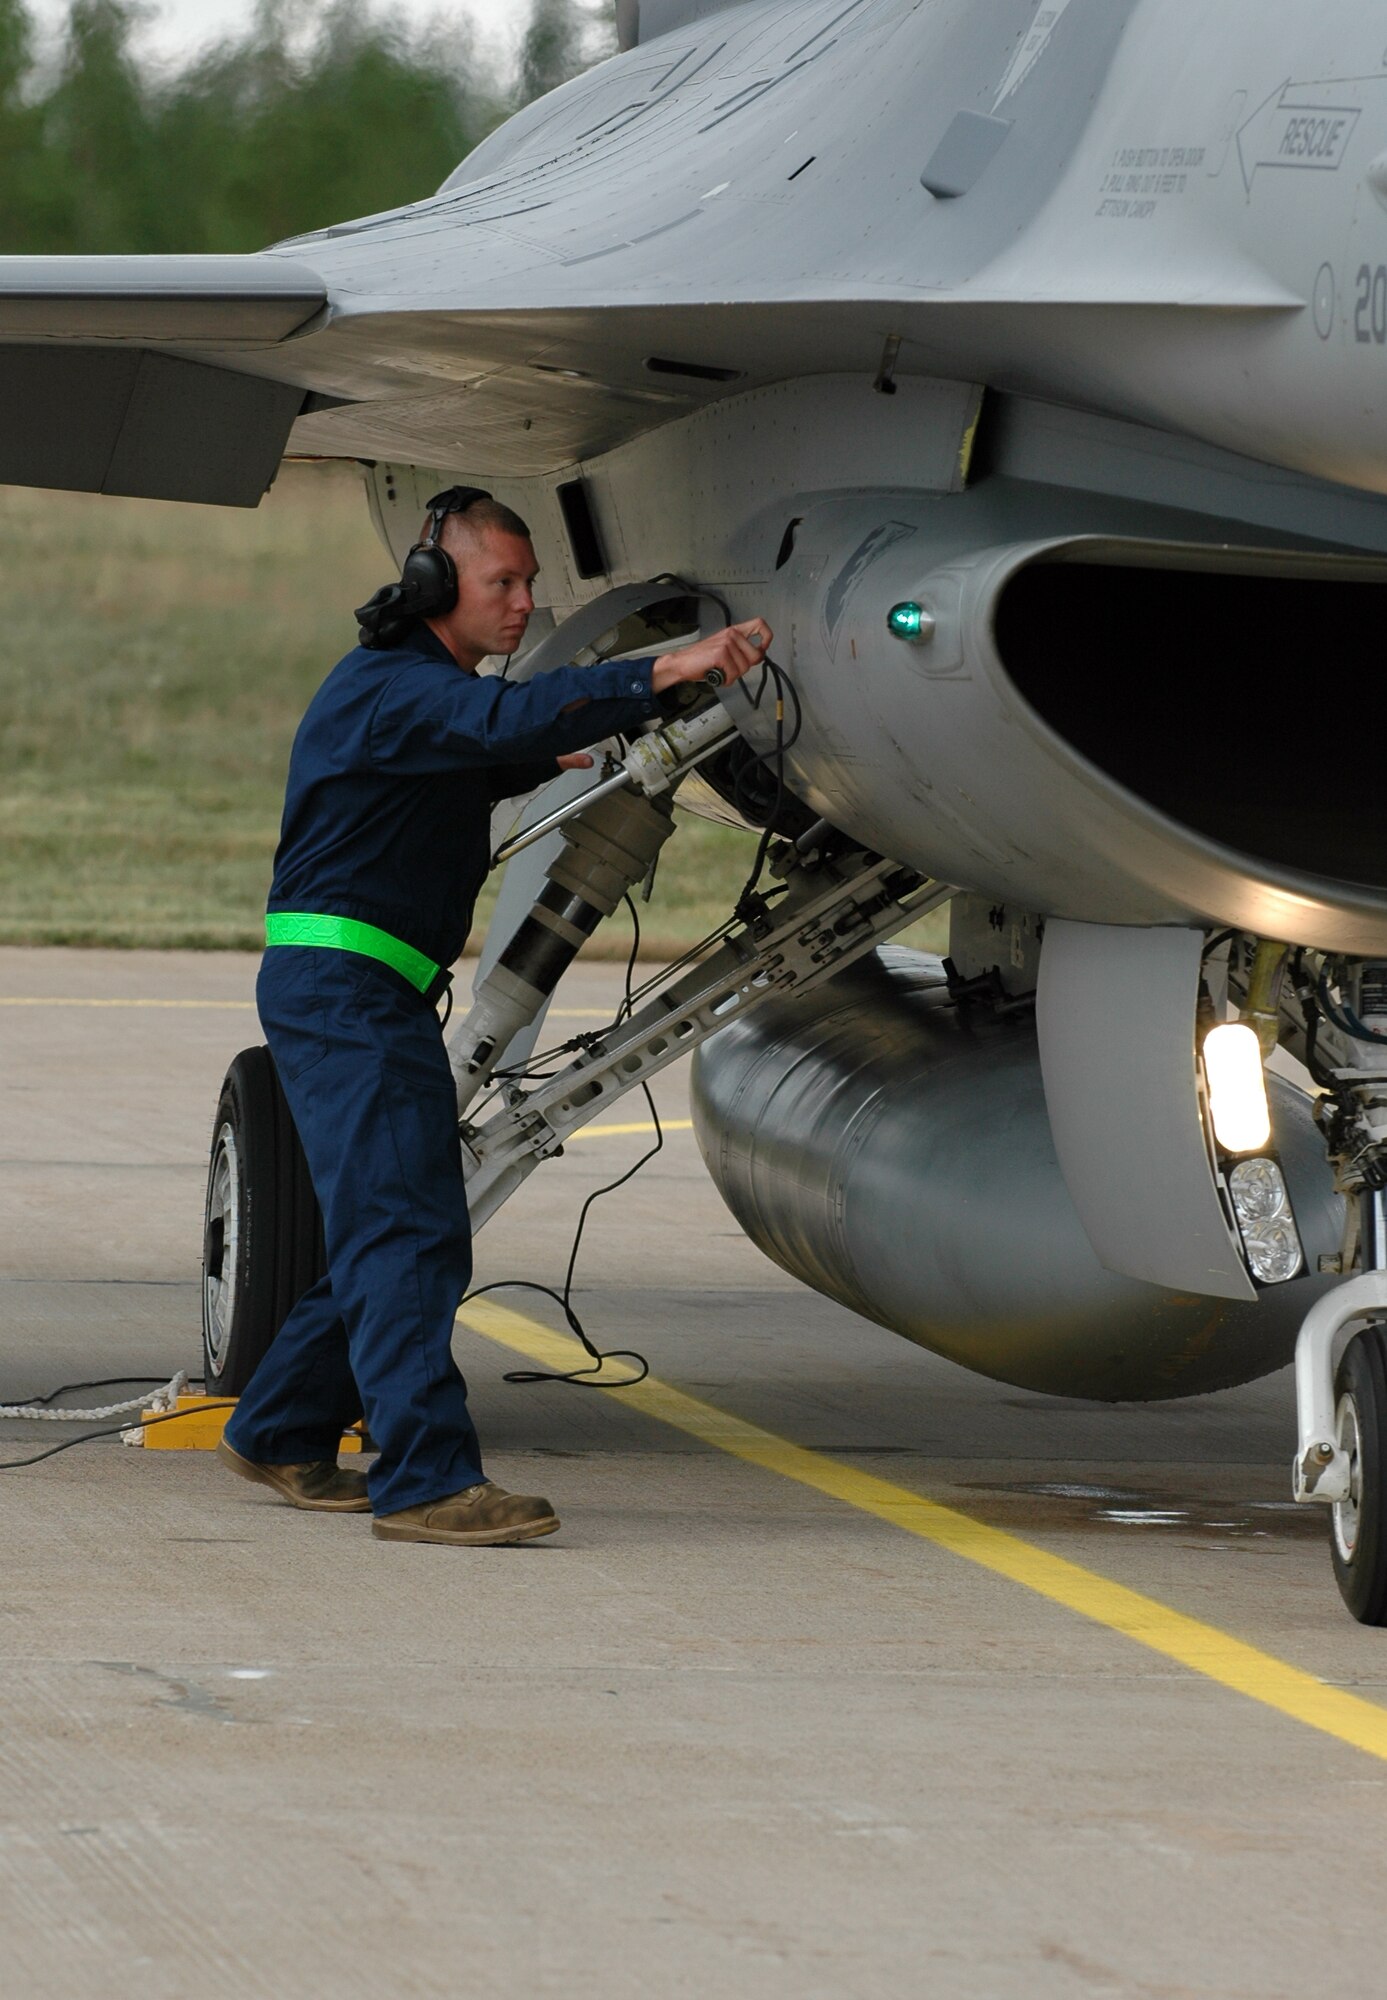 Staff Sgt. Ken Richardson, 31st Aircraft Maintenance Squadron crew chief, recovers an F-16 after an air-to-air flying mission Aug. 4, 2010 at Kallax Air Base, Sweden. More than 250 men and women from the 555th Fighter Squadron and 31st AMXS traveled to the Swedish air base on July 30, 2010 for a two week exercise conducting air-to-air and air-to-ground flying missions alongside F 21 Wing. (U.S. Air Force photo by Tech. Sgt. Lindsey Maurice/Released)